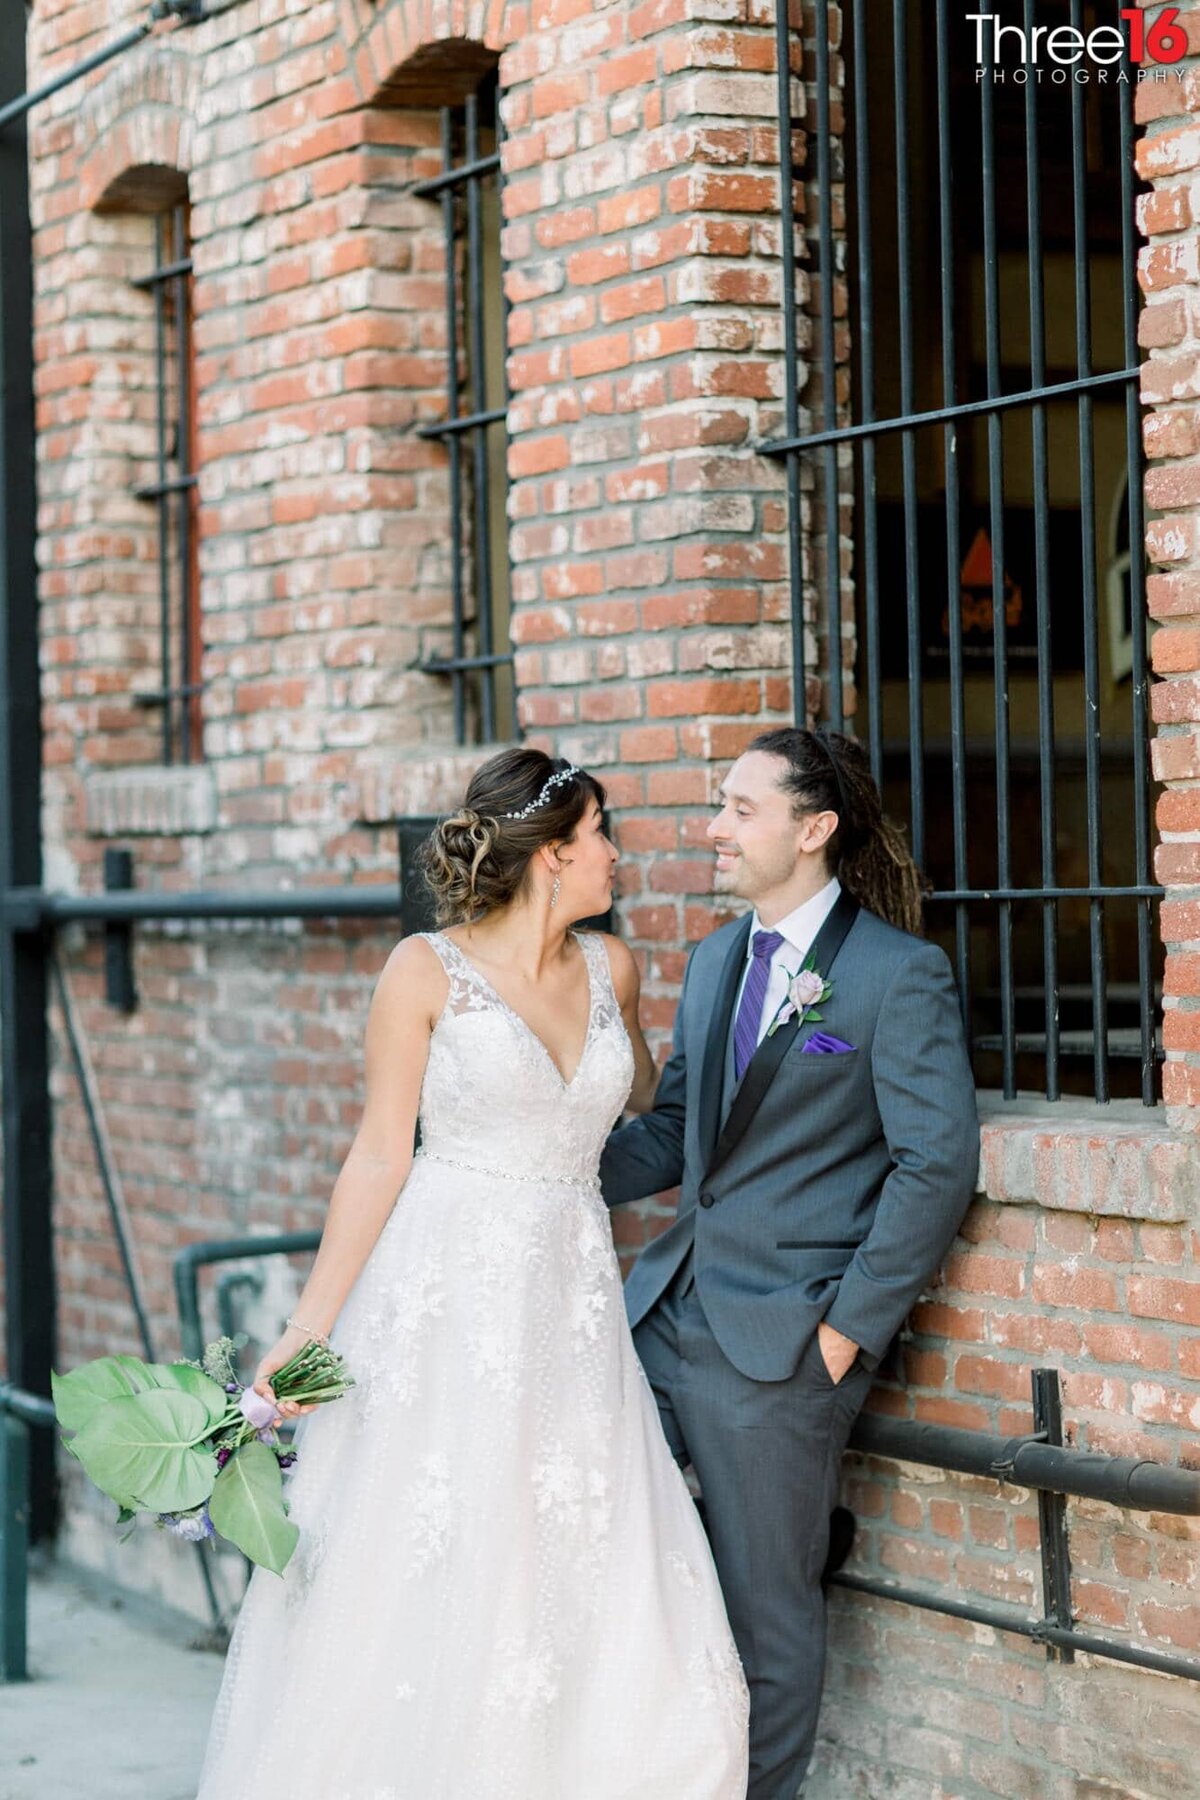 Bride and Groom share a quiet moment together against a brick building